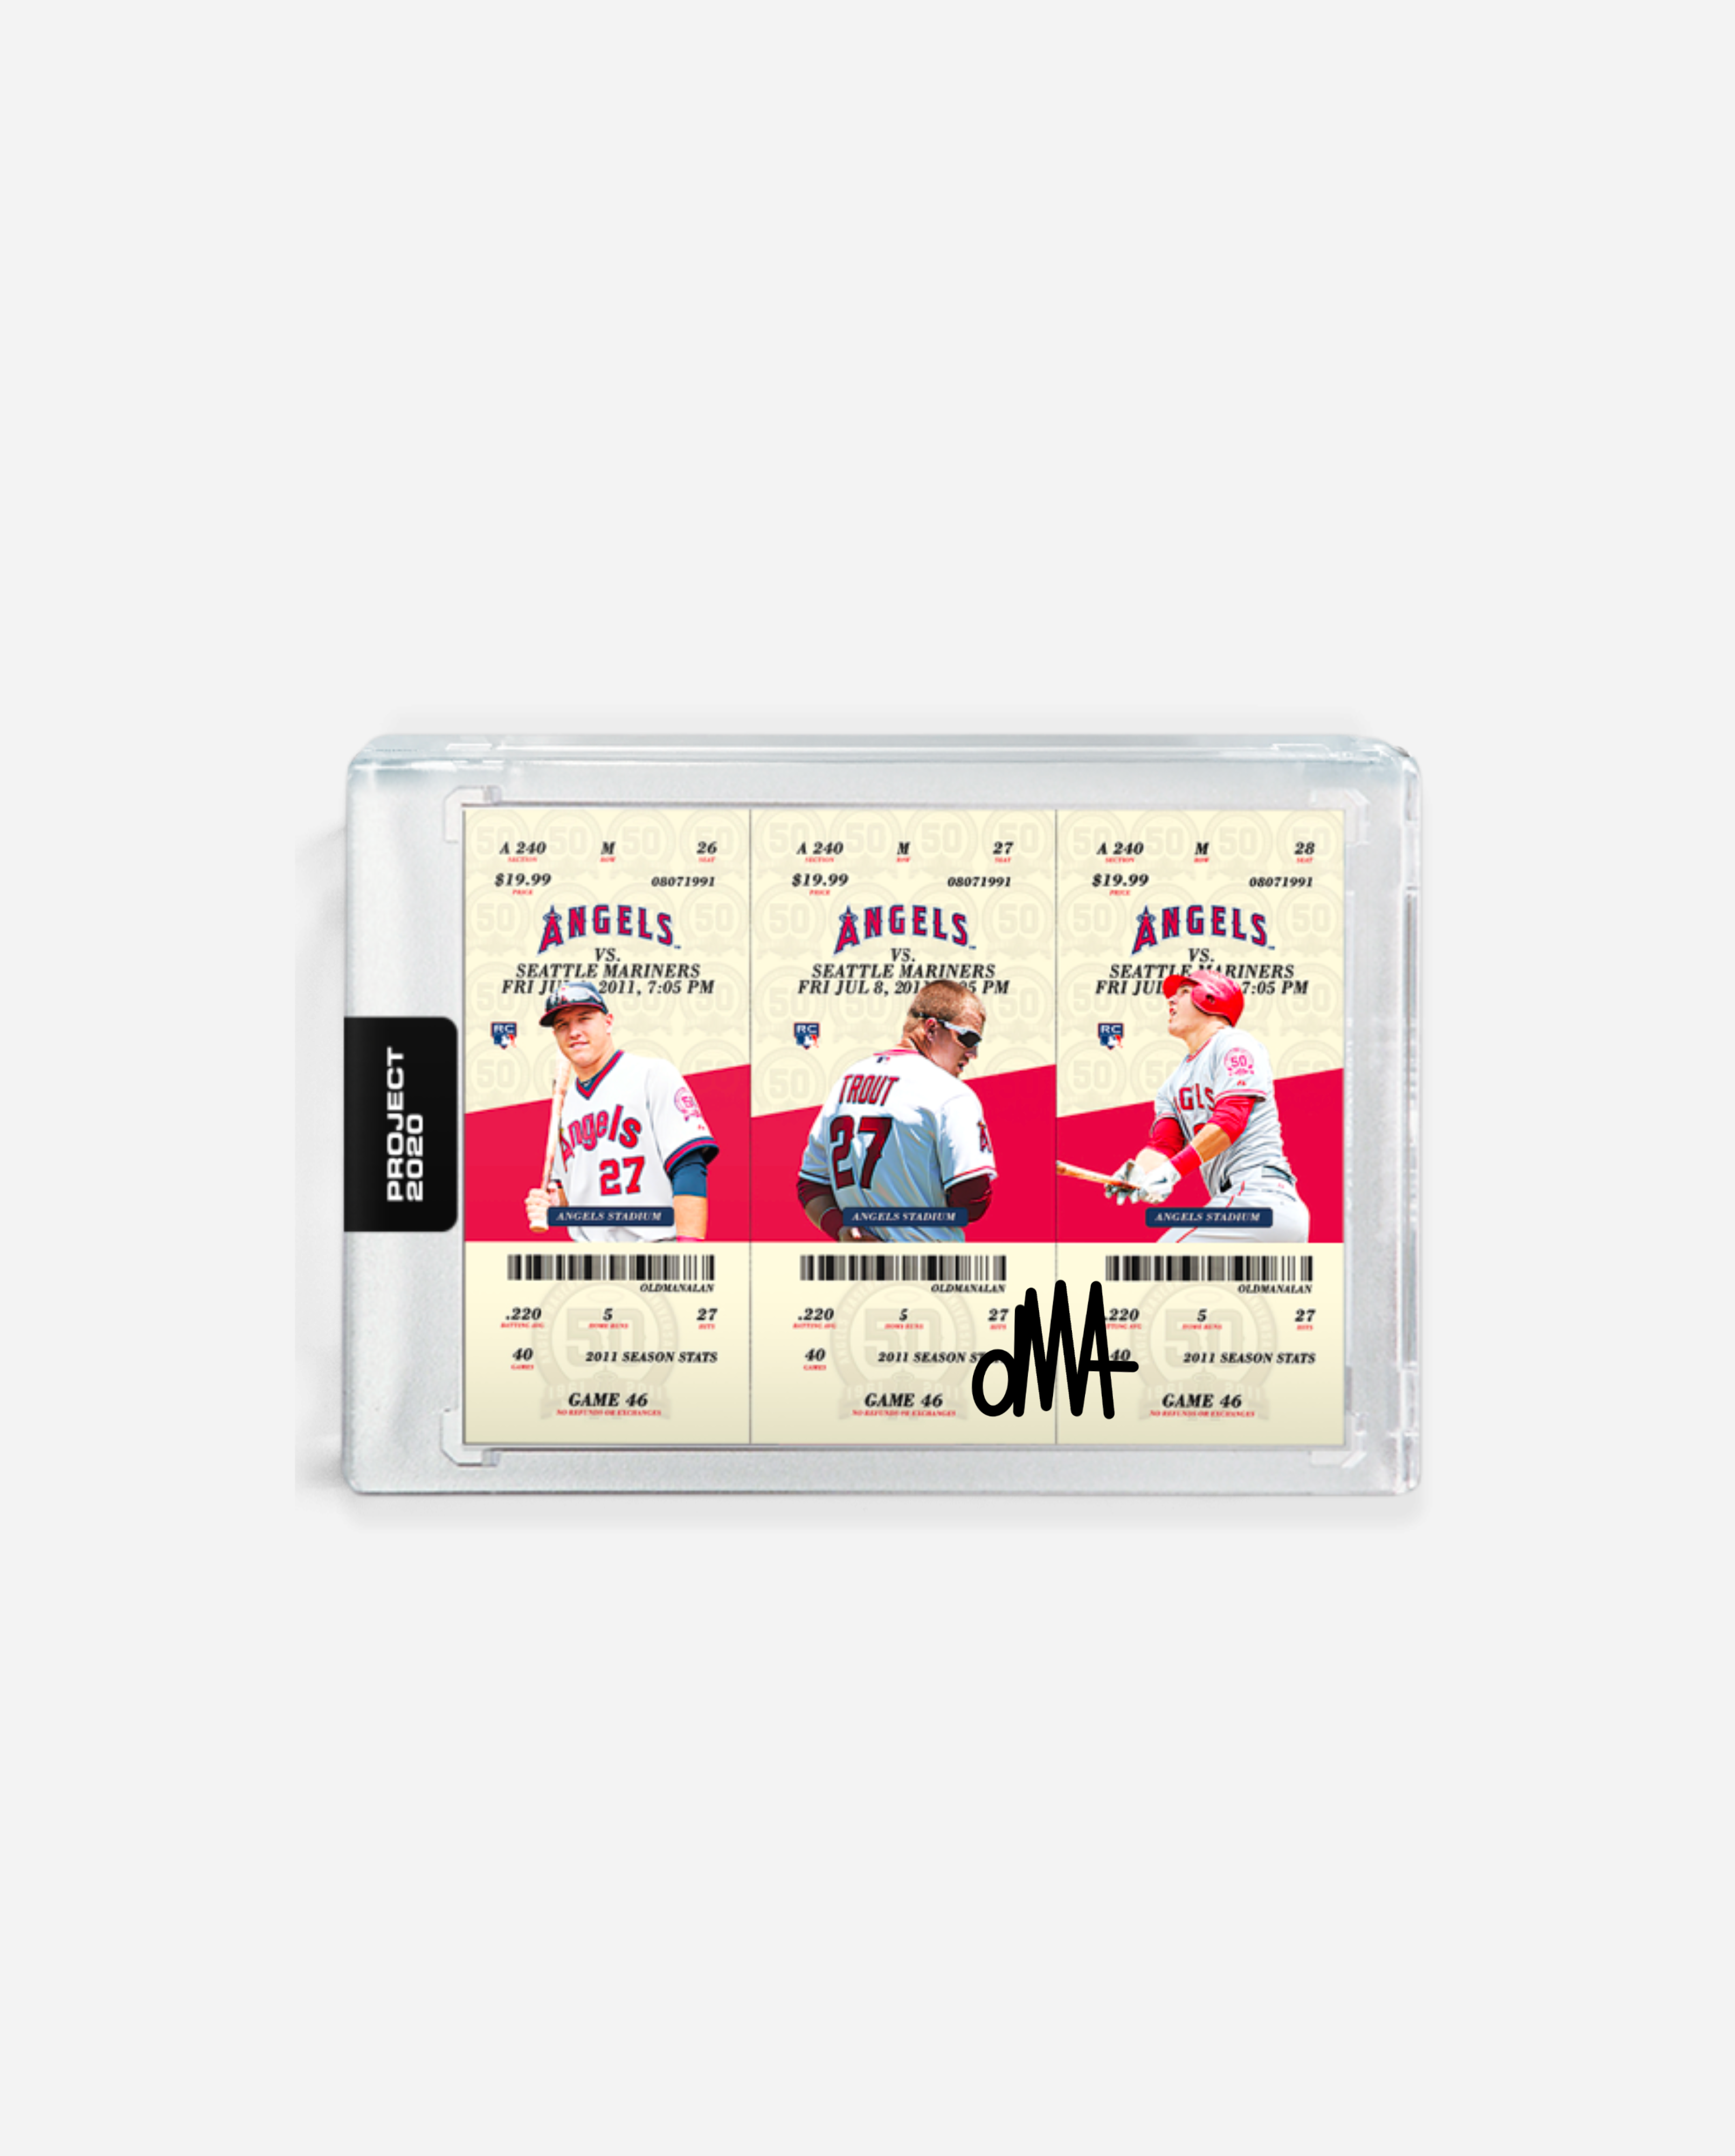 Mike Trout x oMA x Topps Project 2020 Autographed Card